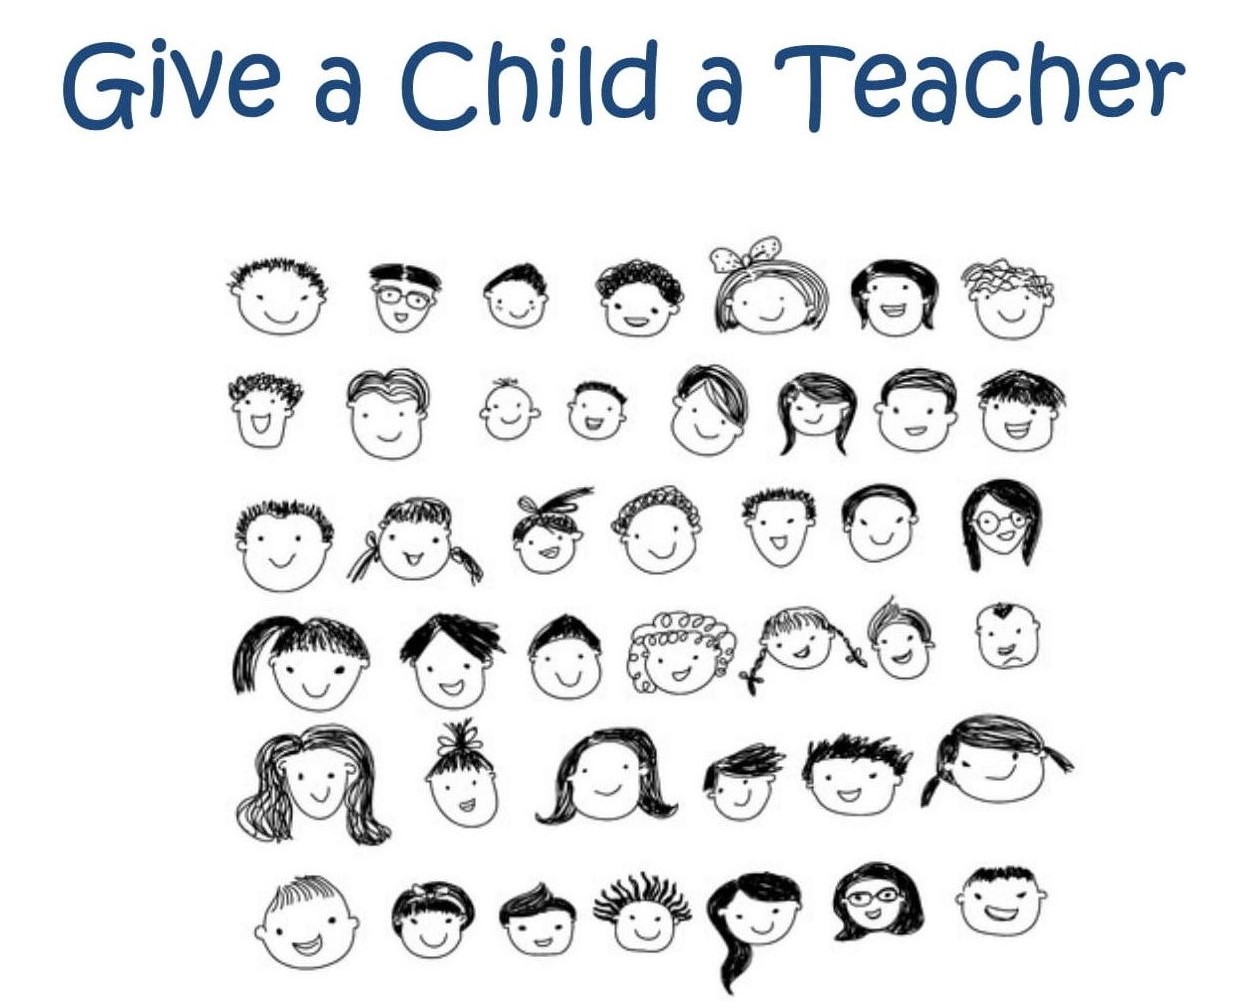 'Give a Child a Teacher' Fundraising Campaign 2021 - RESULTS!